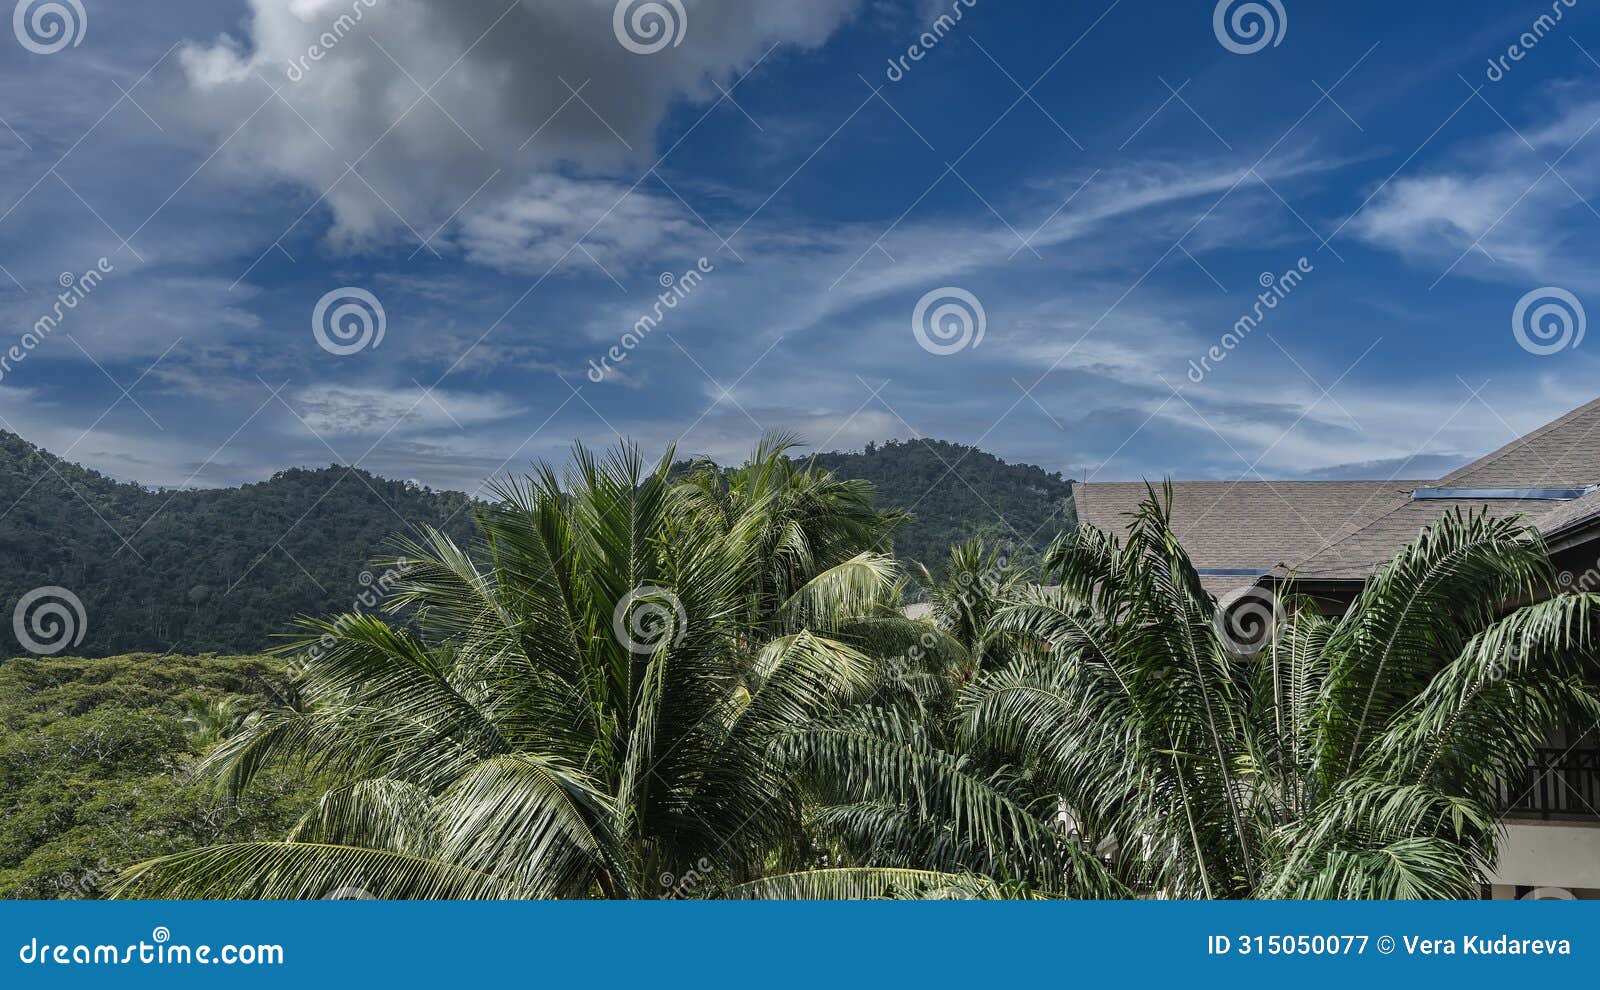 a tropical landscape. sprawling crowns of palm trees, lush green vegetation